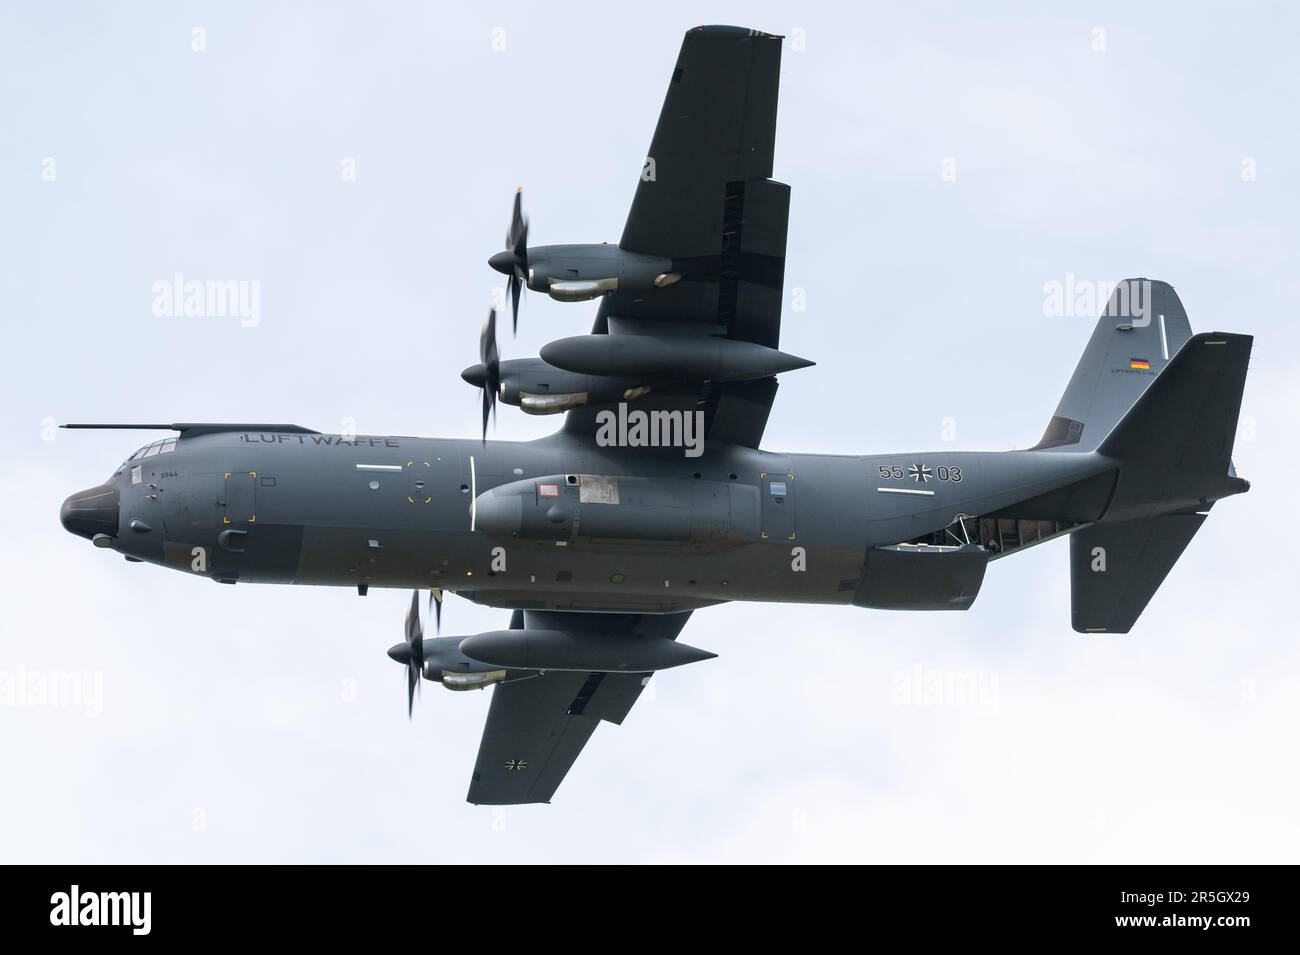 A Lockheed Martin C-130J Super Hercules military transport aircraft of the German Air Force and from the Franco-German Joint Tactical Airlift Squadron. Stock Photo